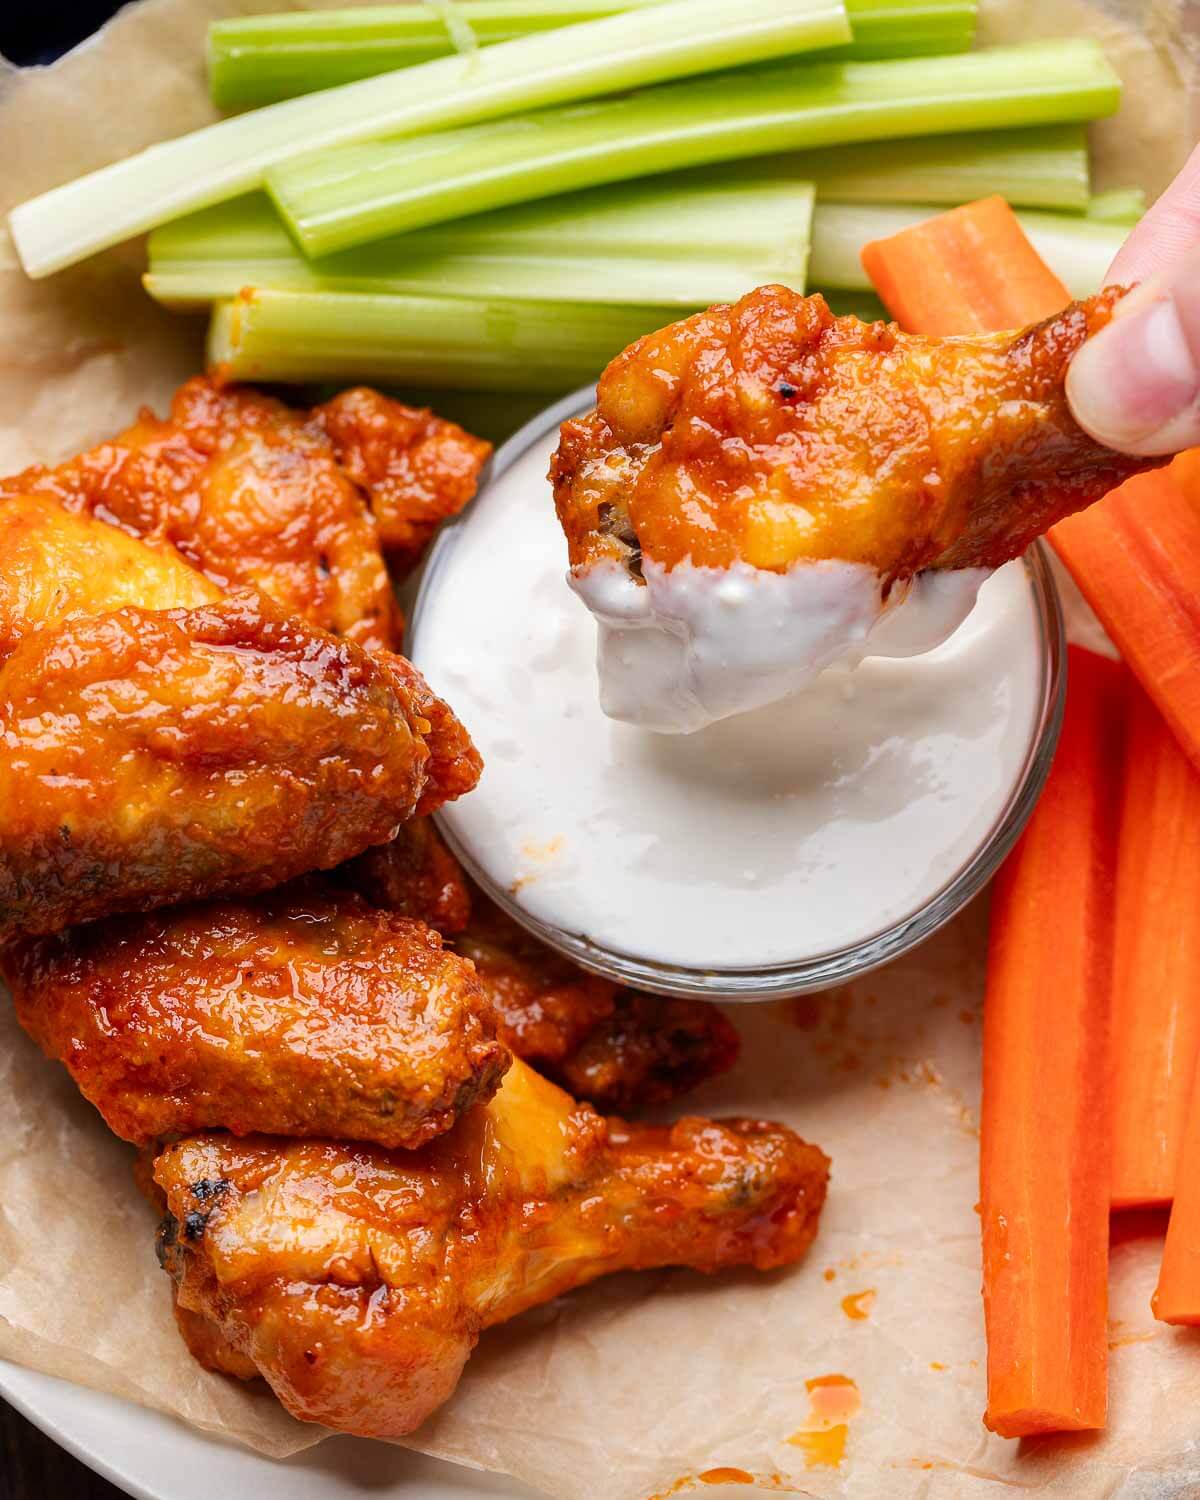 Hand dipping buffalo wing into blue cheese dressing.